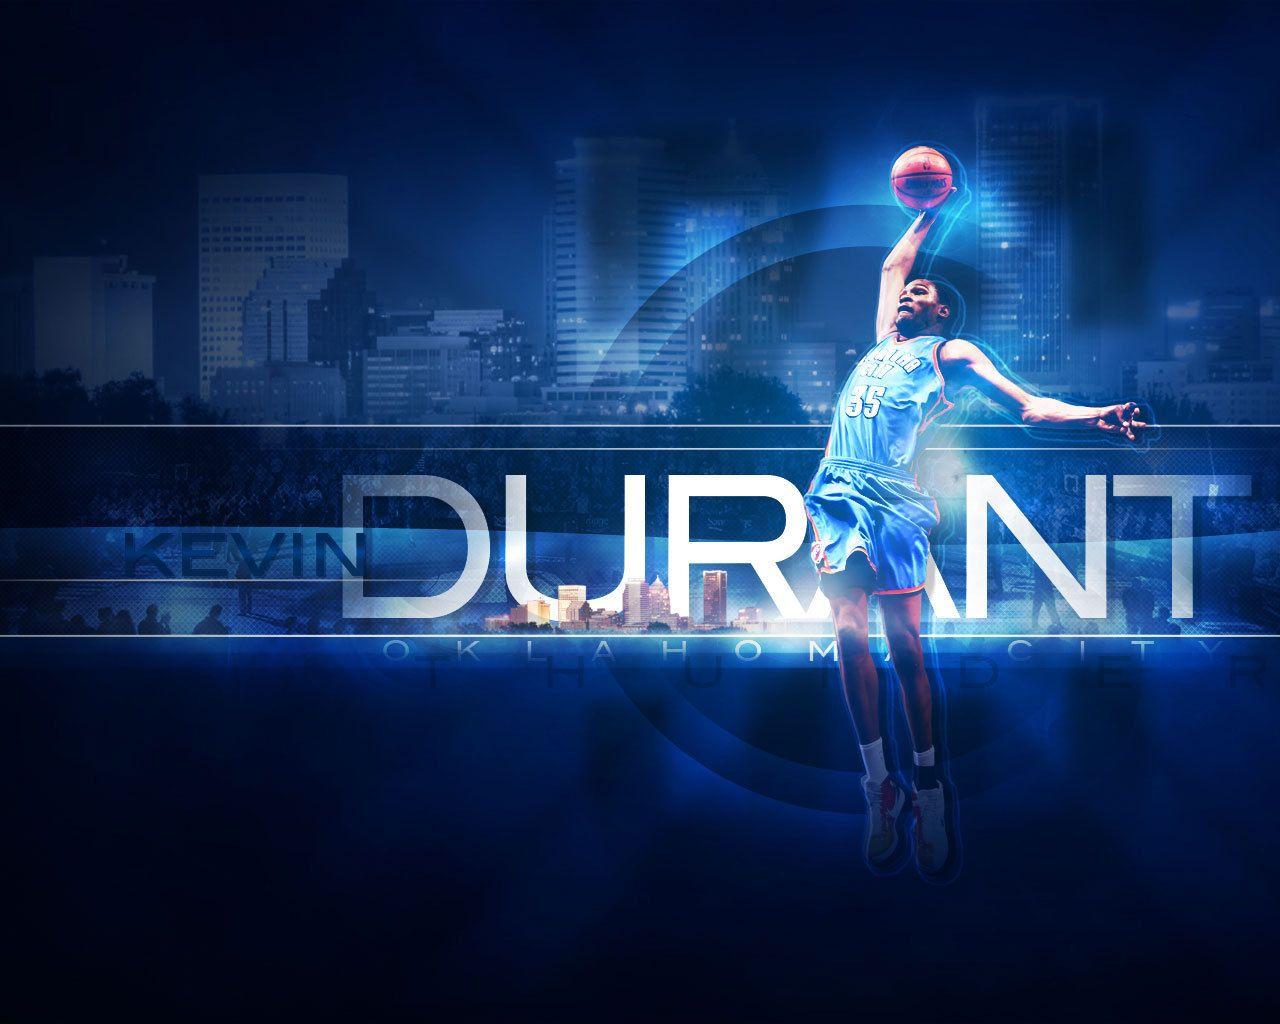 Kevin Durant image Kevin Durant HD wallpaper and background photo